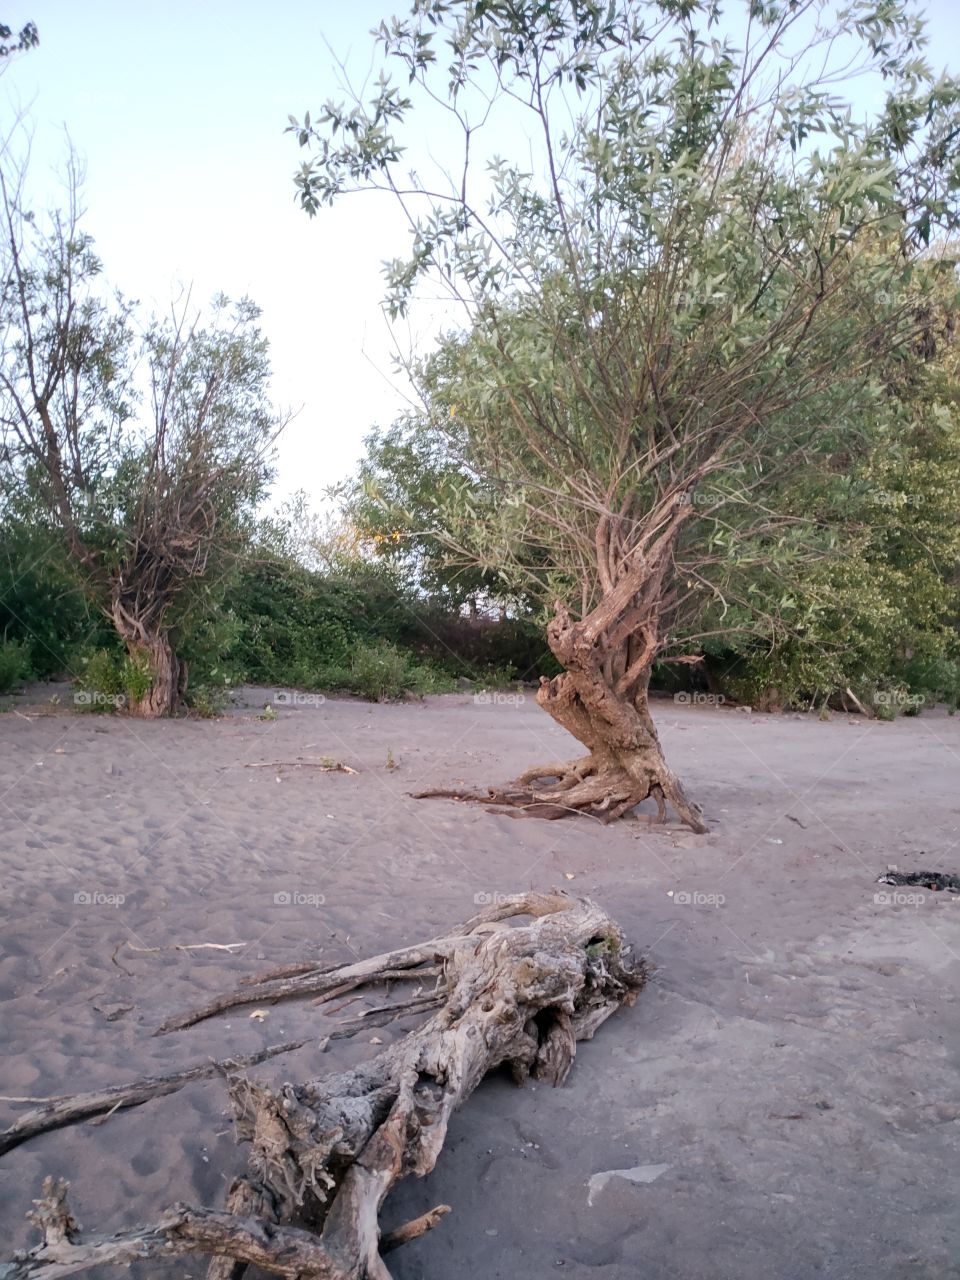 Beach with driftwood and gnarled trees